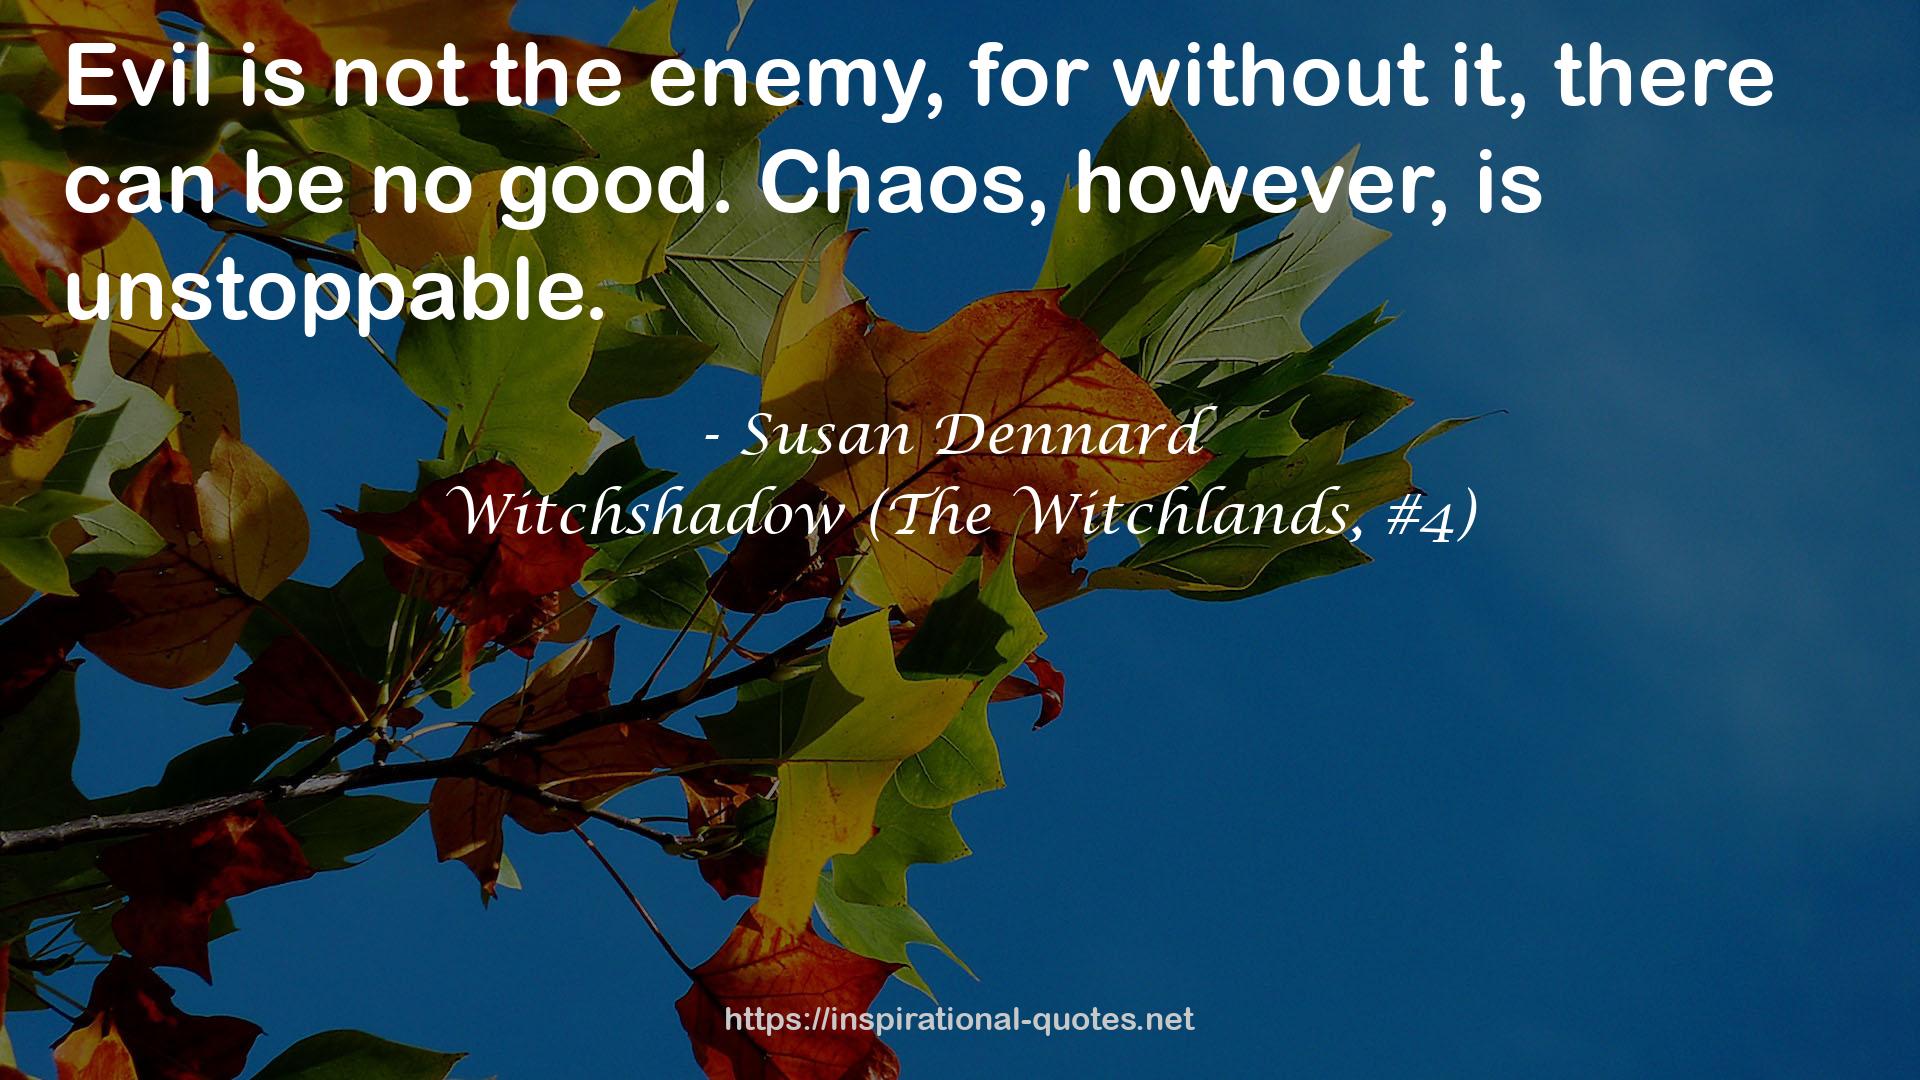 Witchshadow (The Witchlands, #4) QUOTES